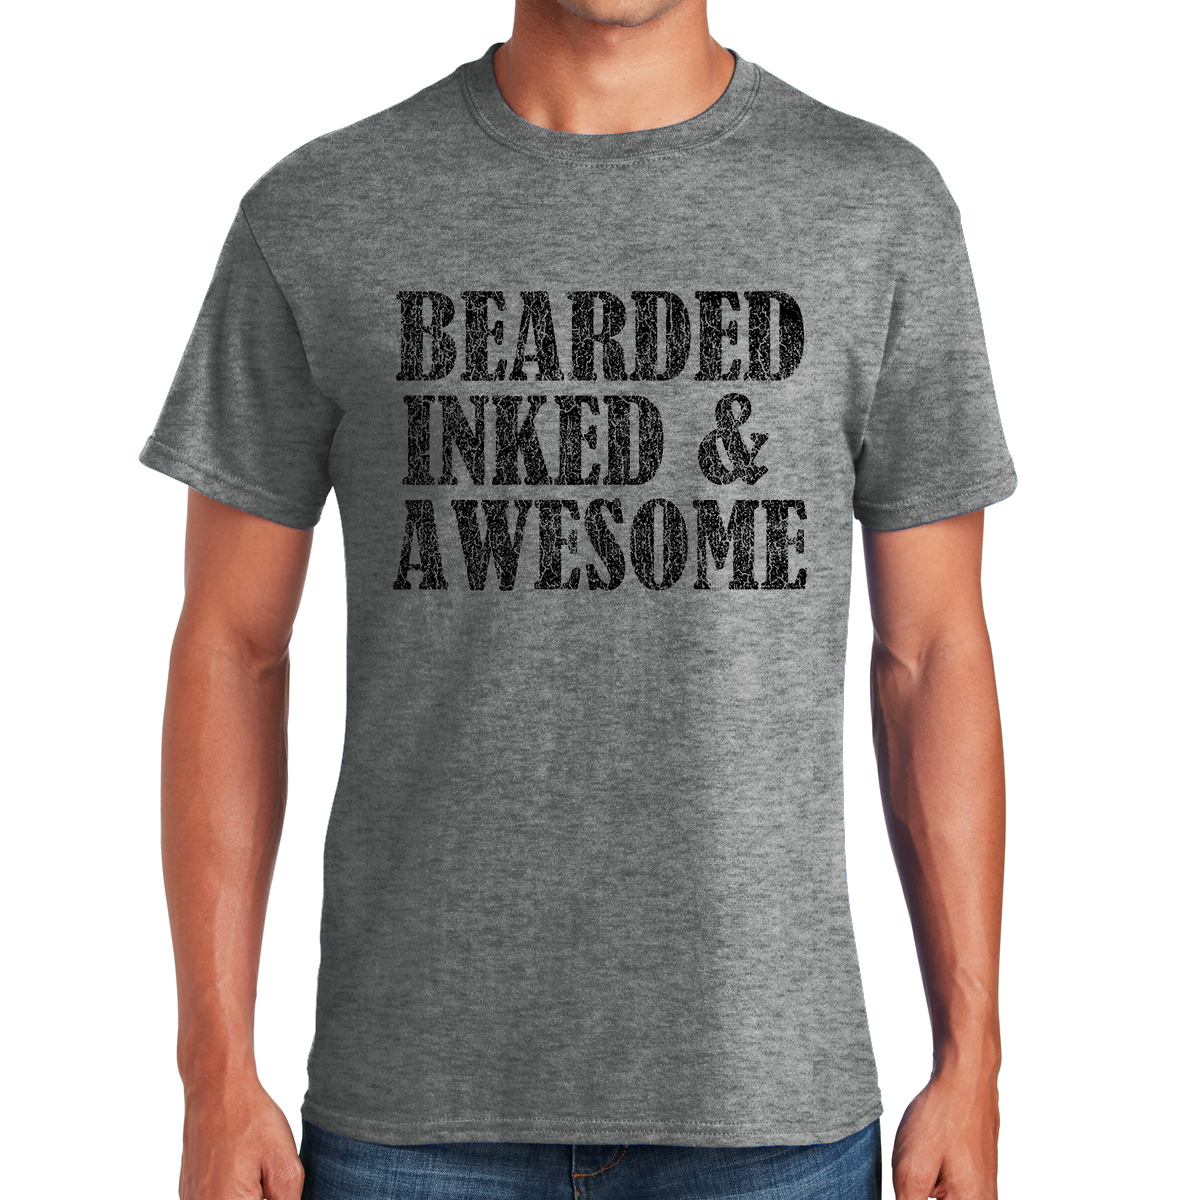 Bearded Inked and Absolutely Awesome Gifts for Dads T-shirt